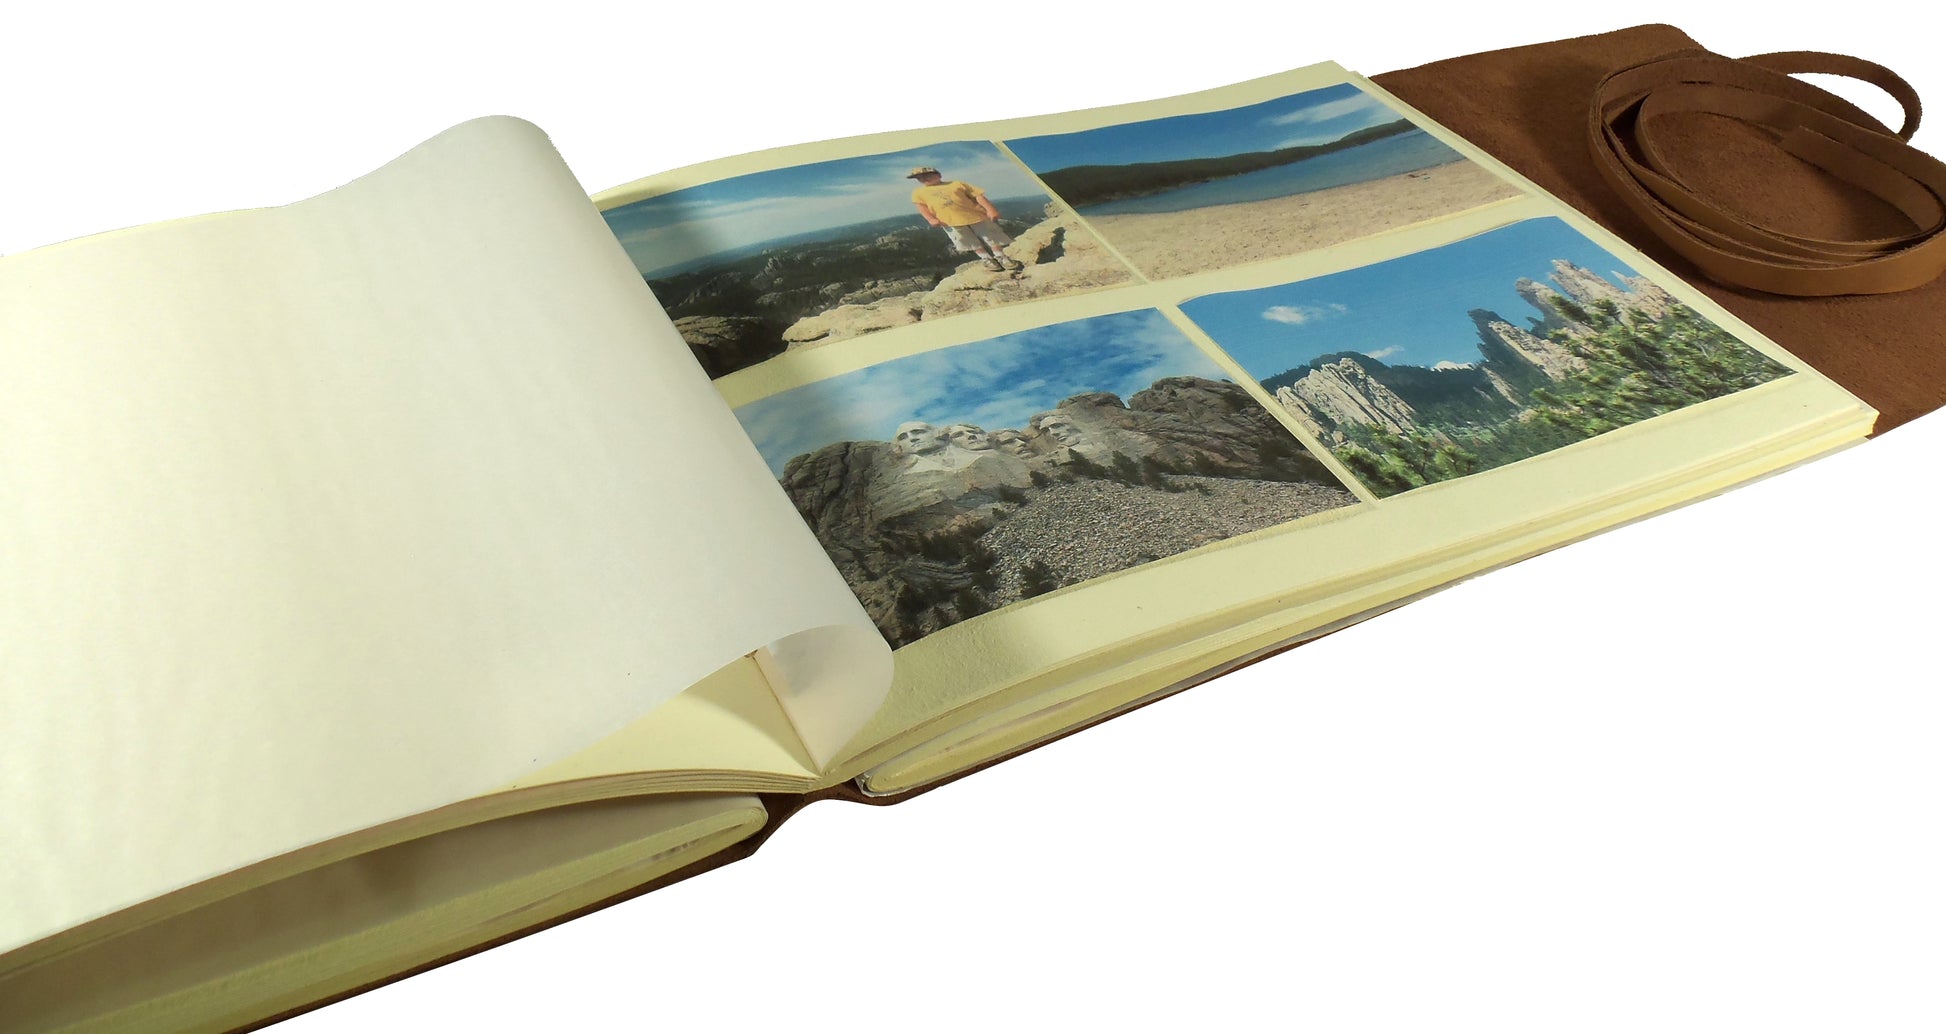 Large Rustic Genuine Leather Photo Album with Gift Box - Scrapbook Style Pages - Holds 400 4x6 or 200 5x7 Photos